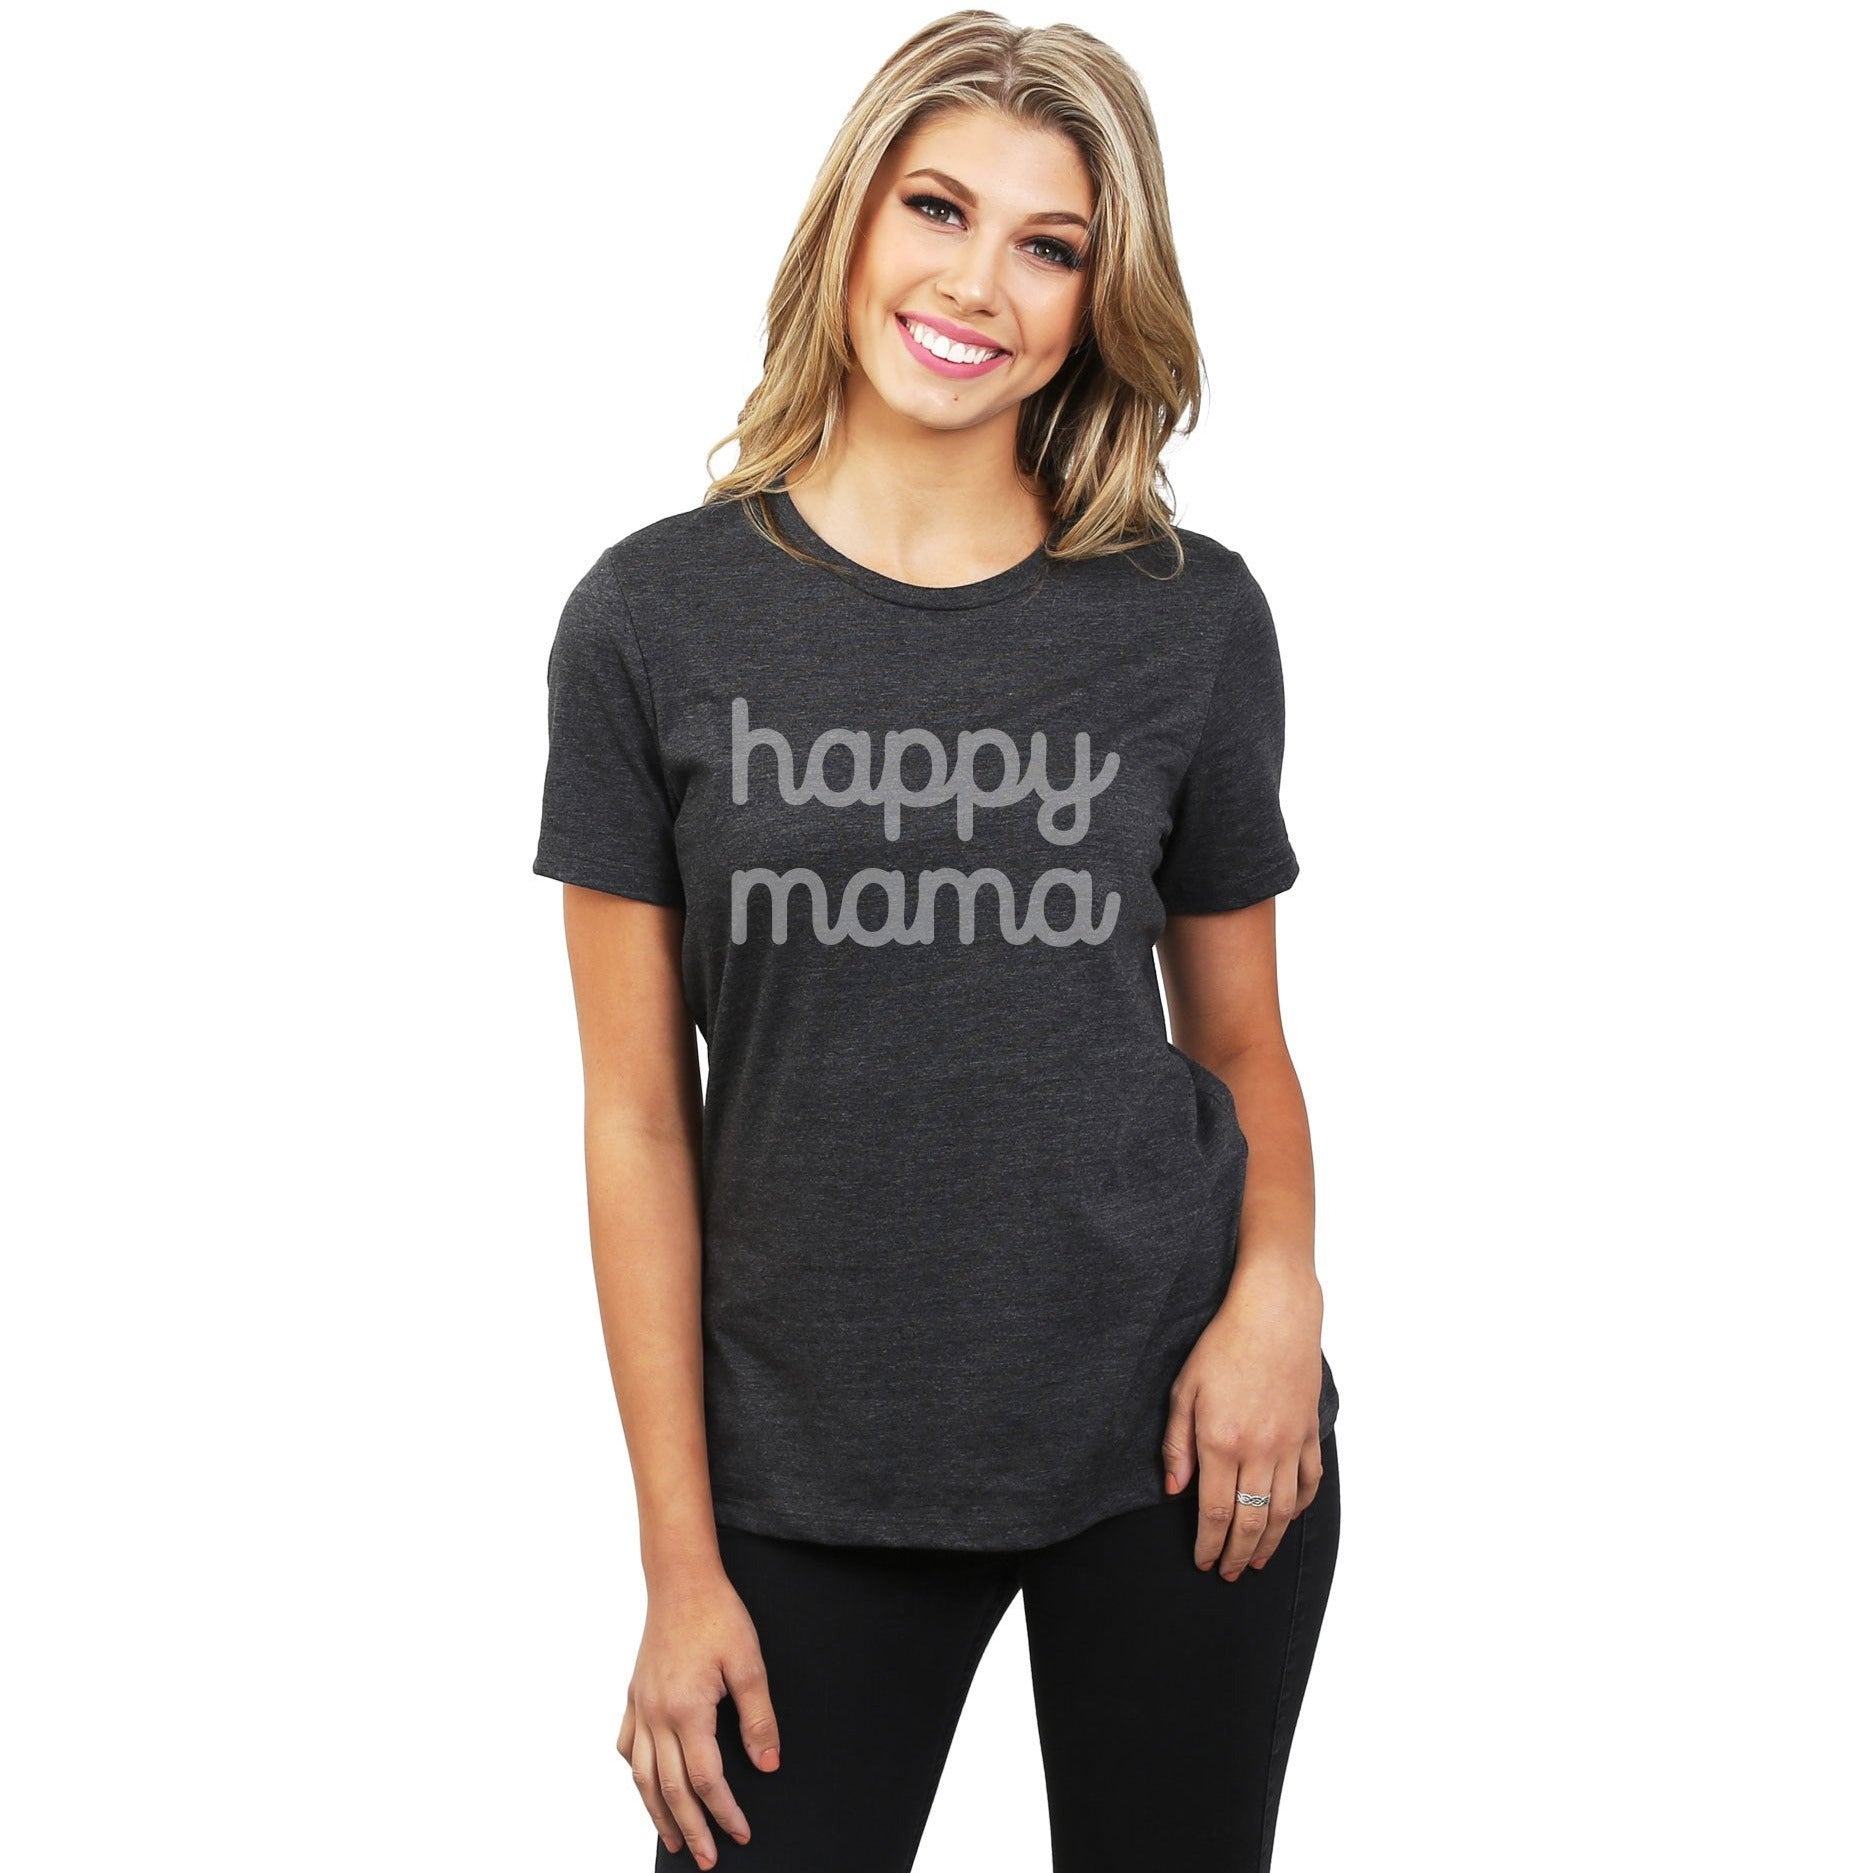 Happy Mama Women's Relaxed Crewneck T-Shirt Top Tee Charcoal Model
